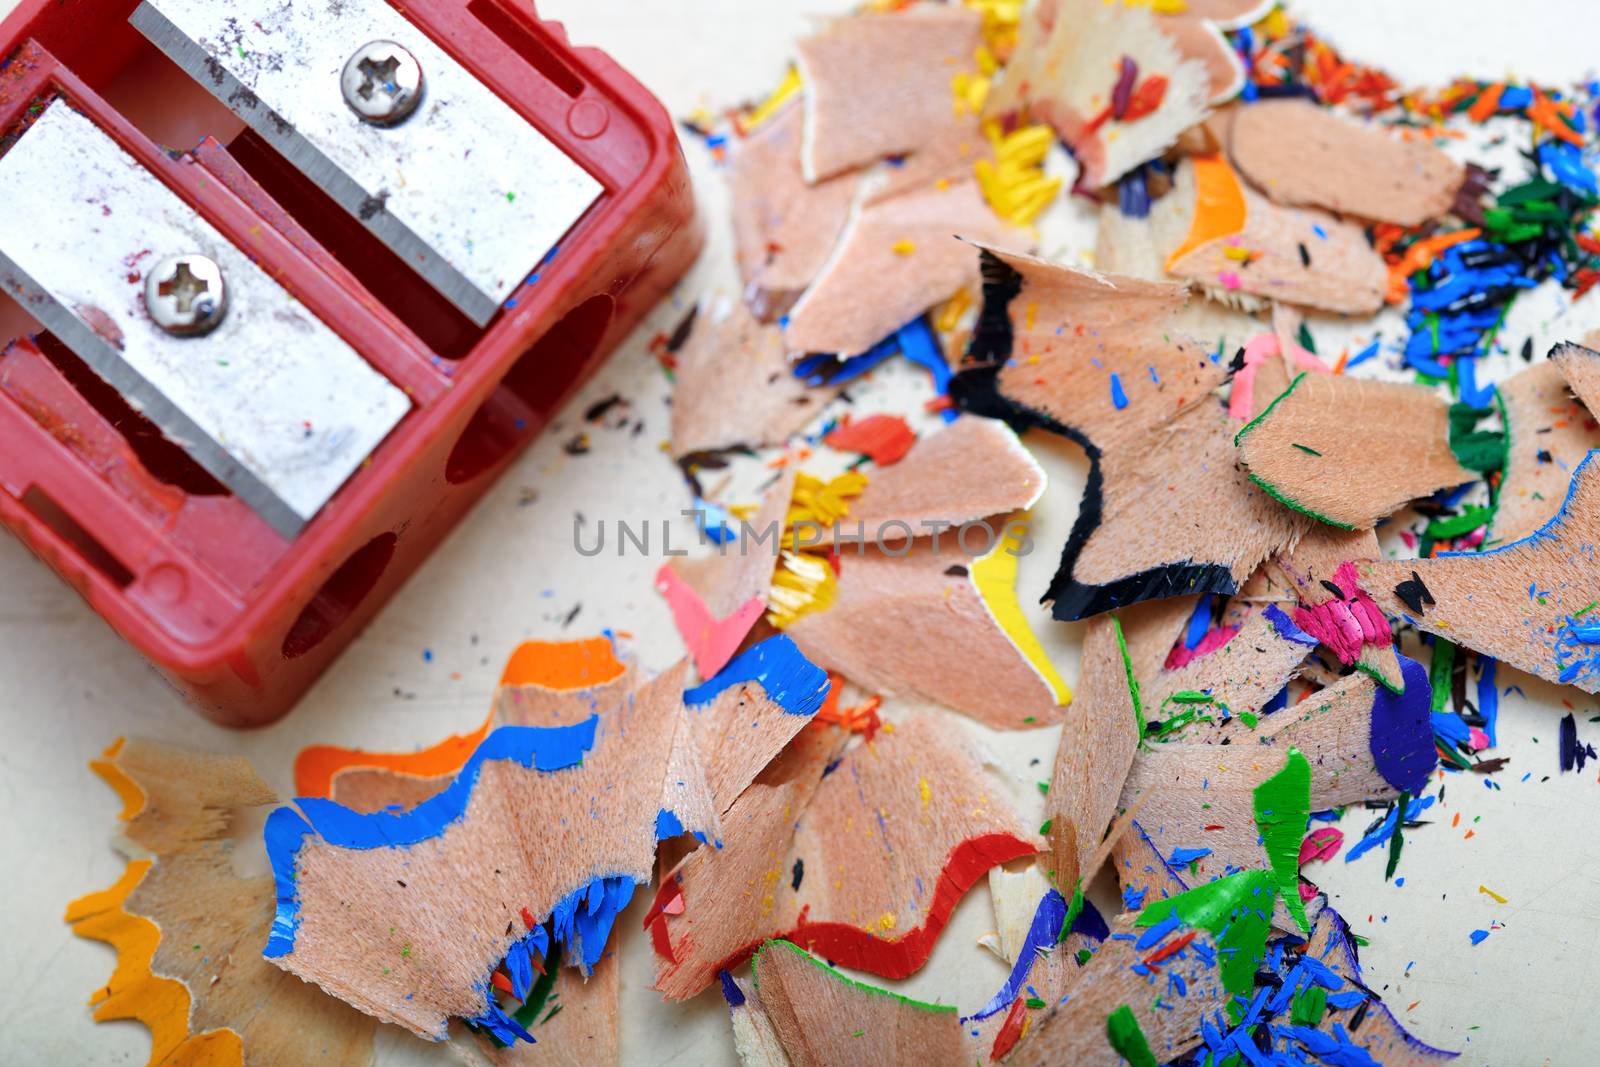 Sharpener and colored pencil shavings by Novic